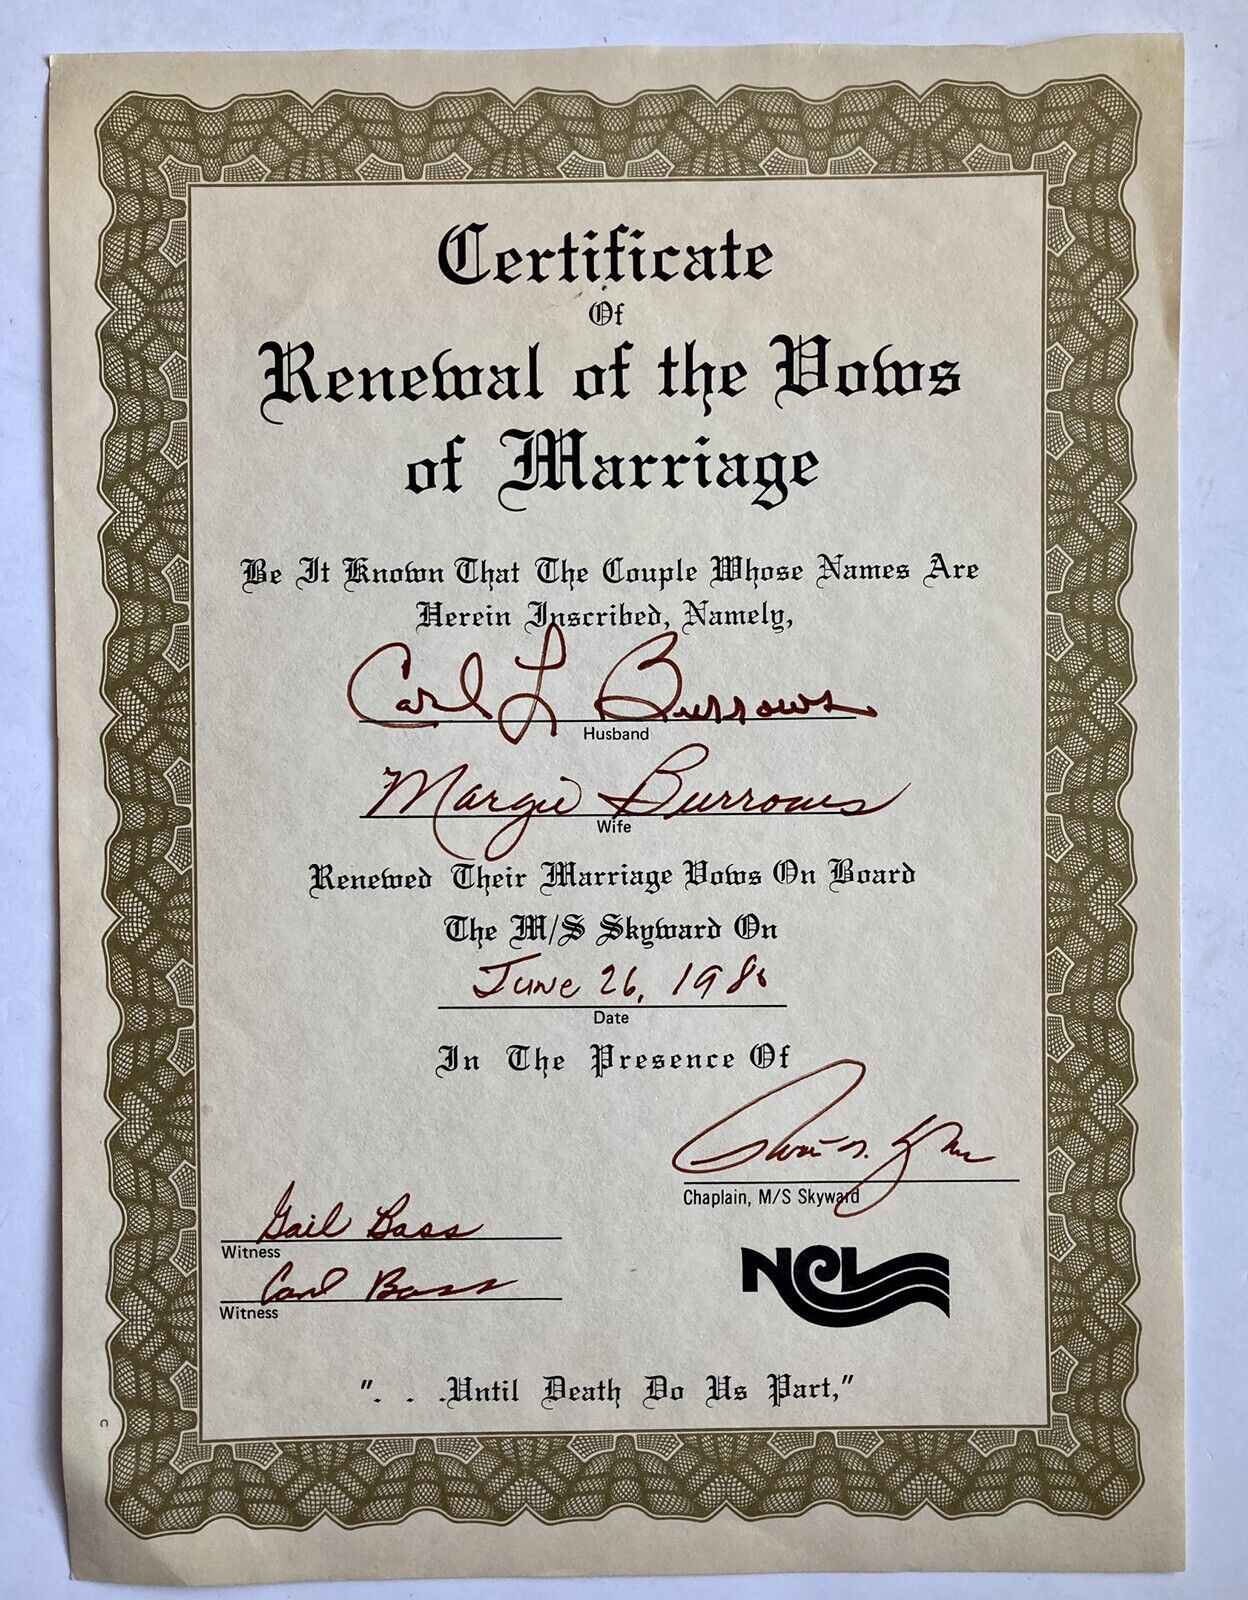 Cruise Ship NCL MS Skyward 1980’s Certificate Renewal Marriage Vows Certificate